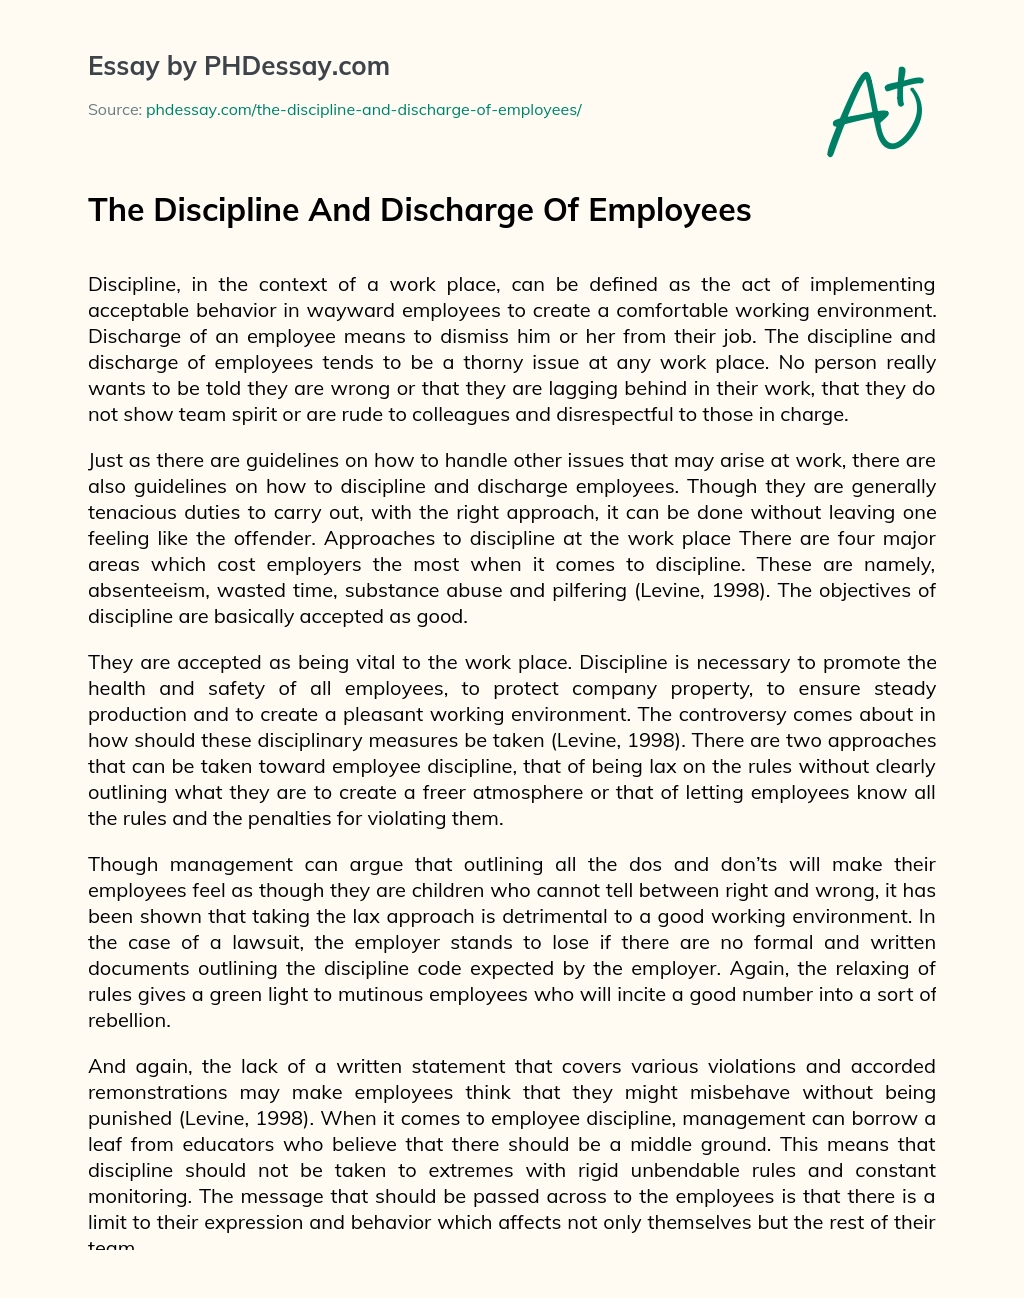 The Discipline And Discharge Of Employees essay